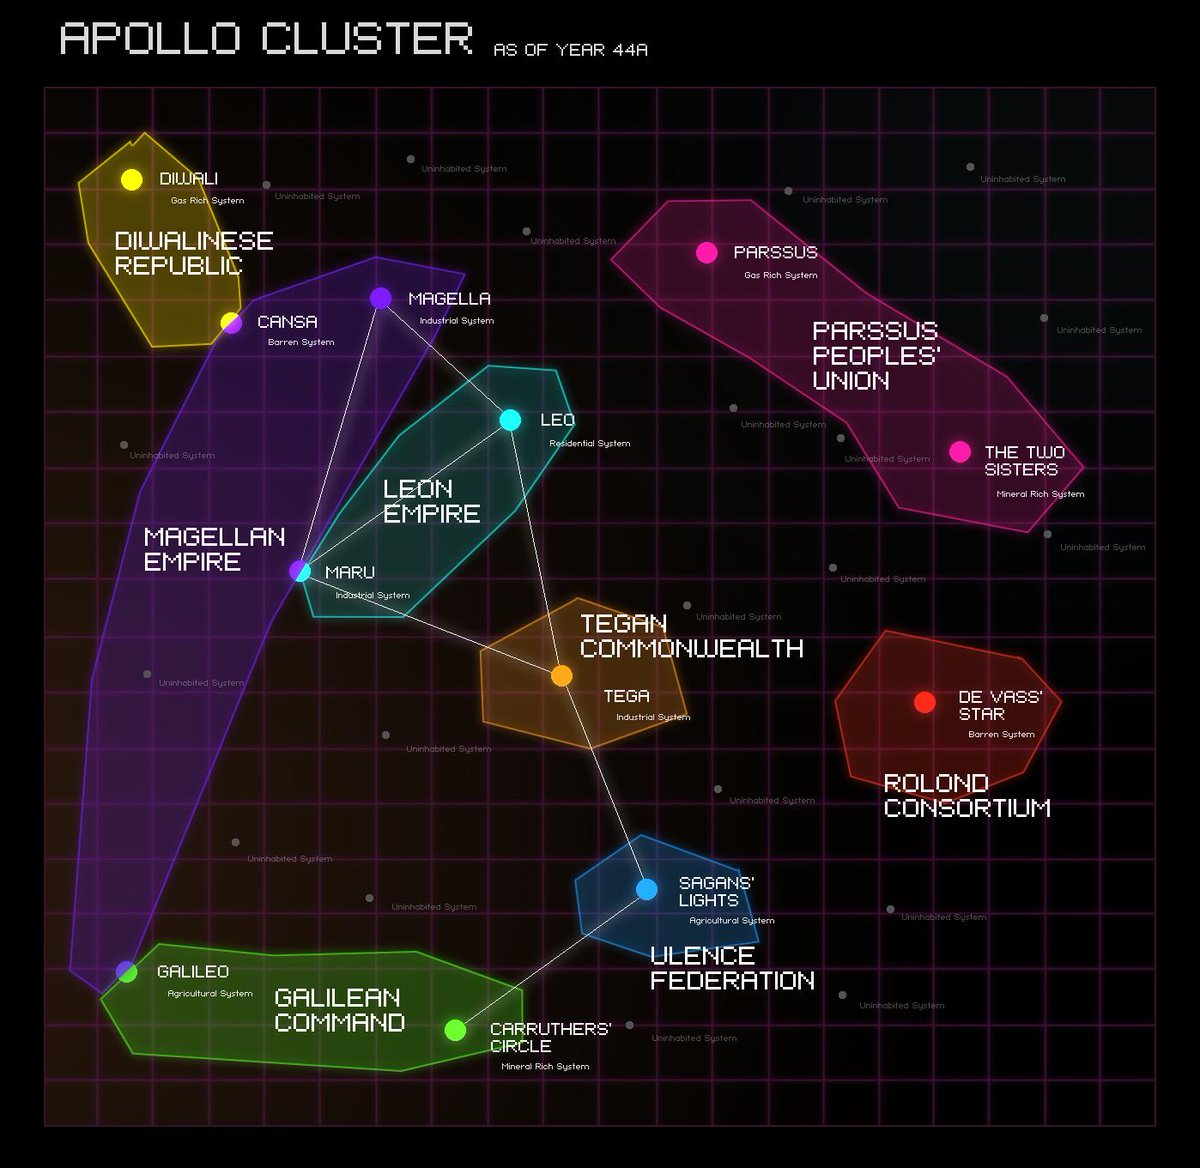  @objectsgame : Apollo Cluster map.